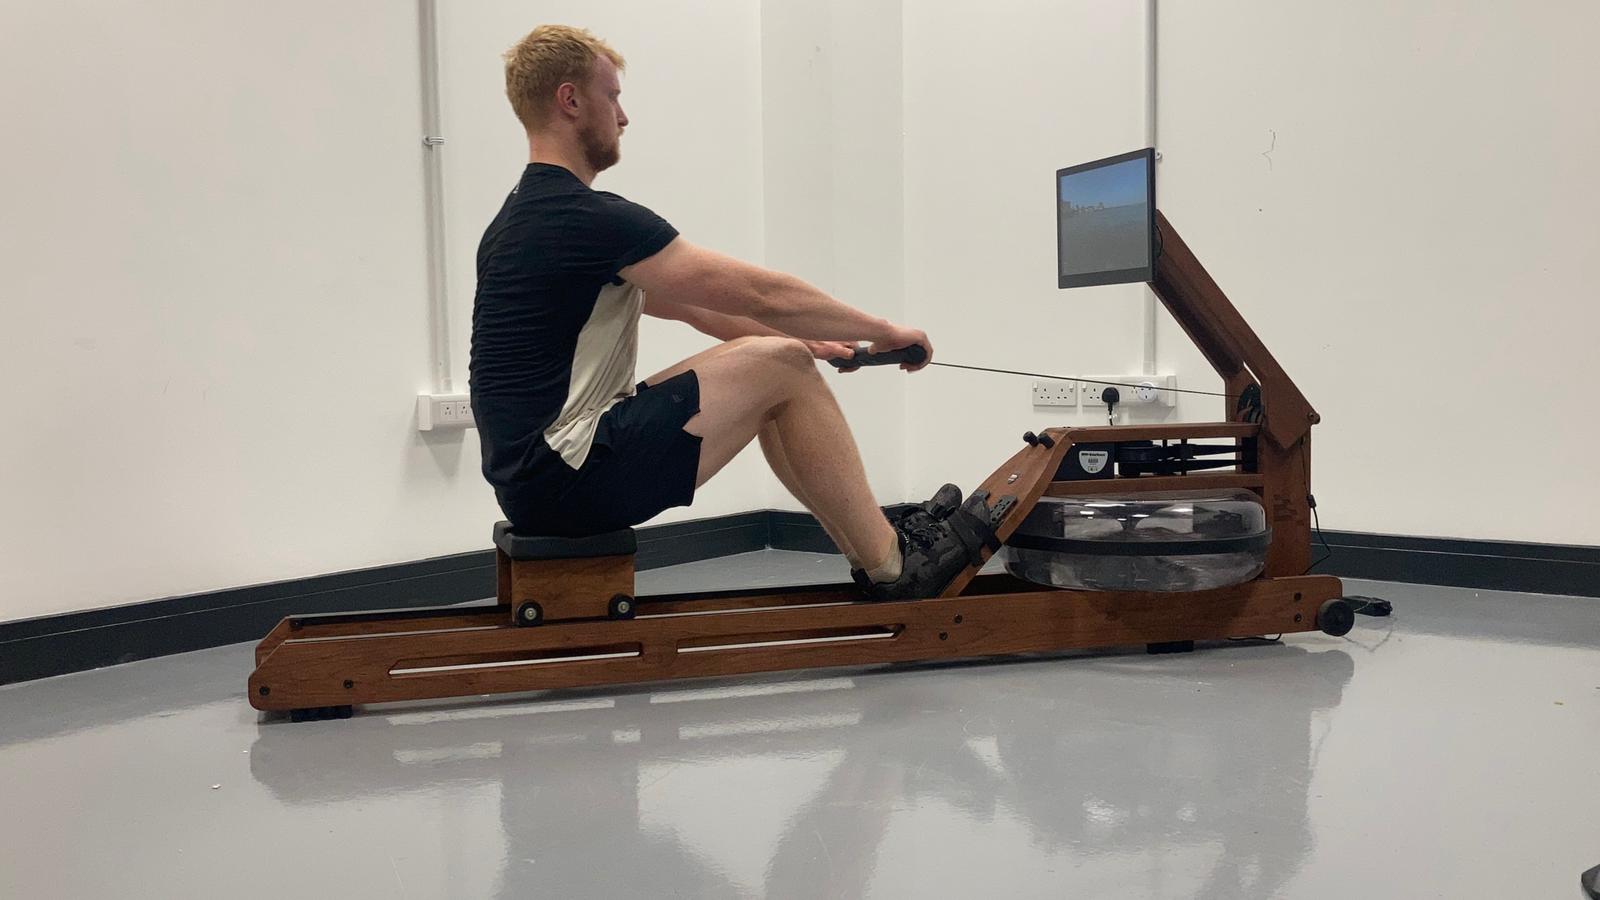 Ergatta Rower being tested by Live Science writer